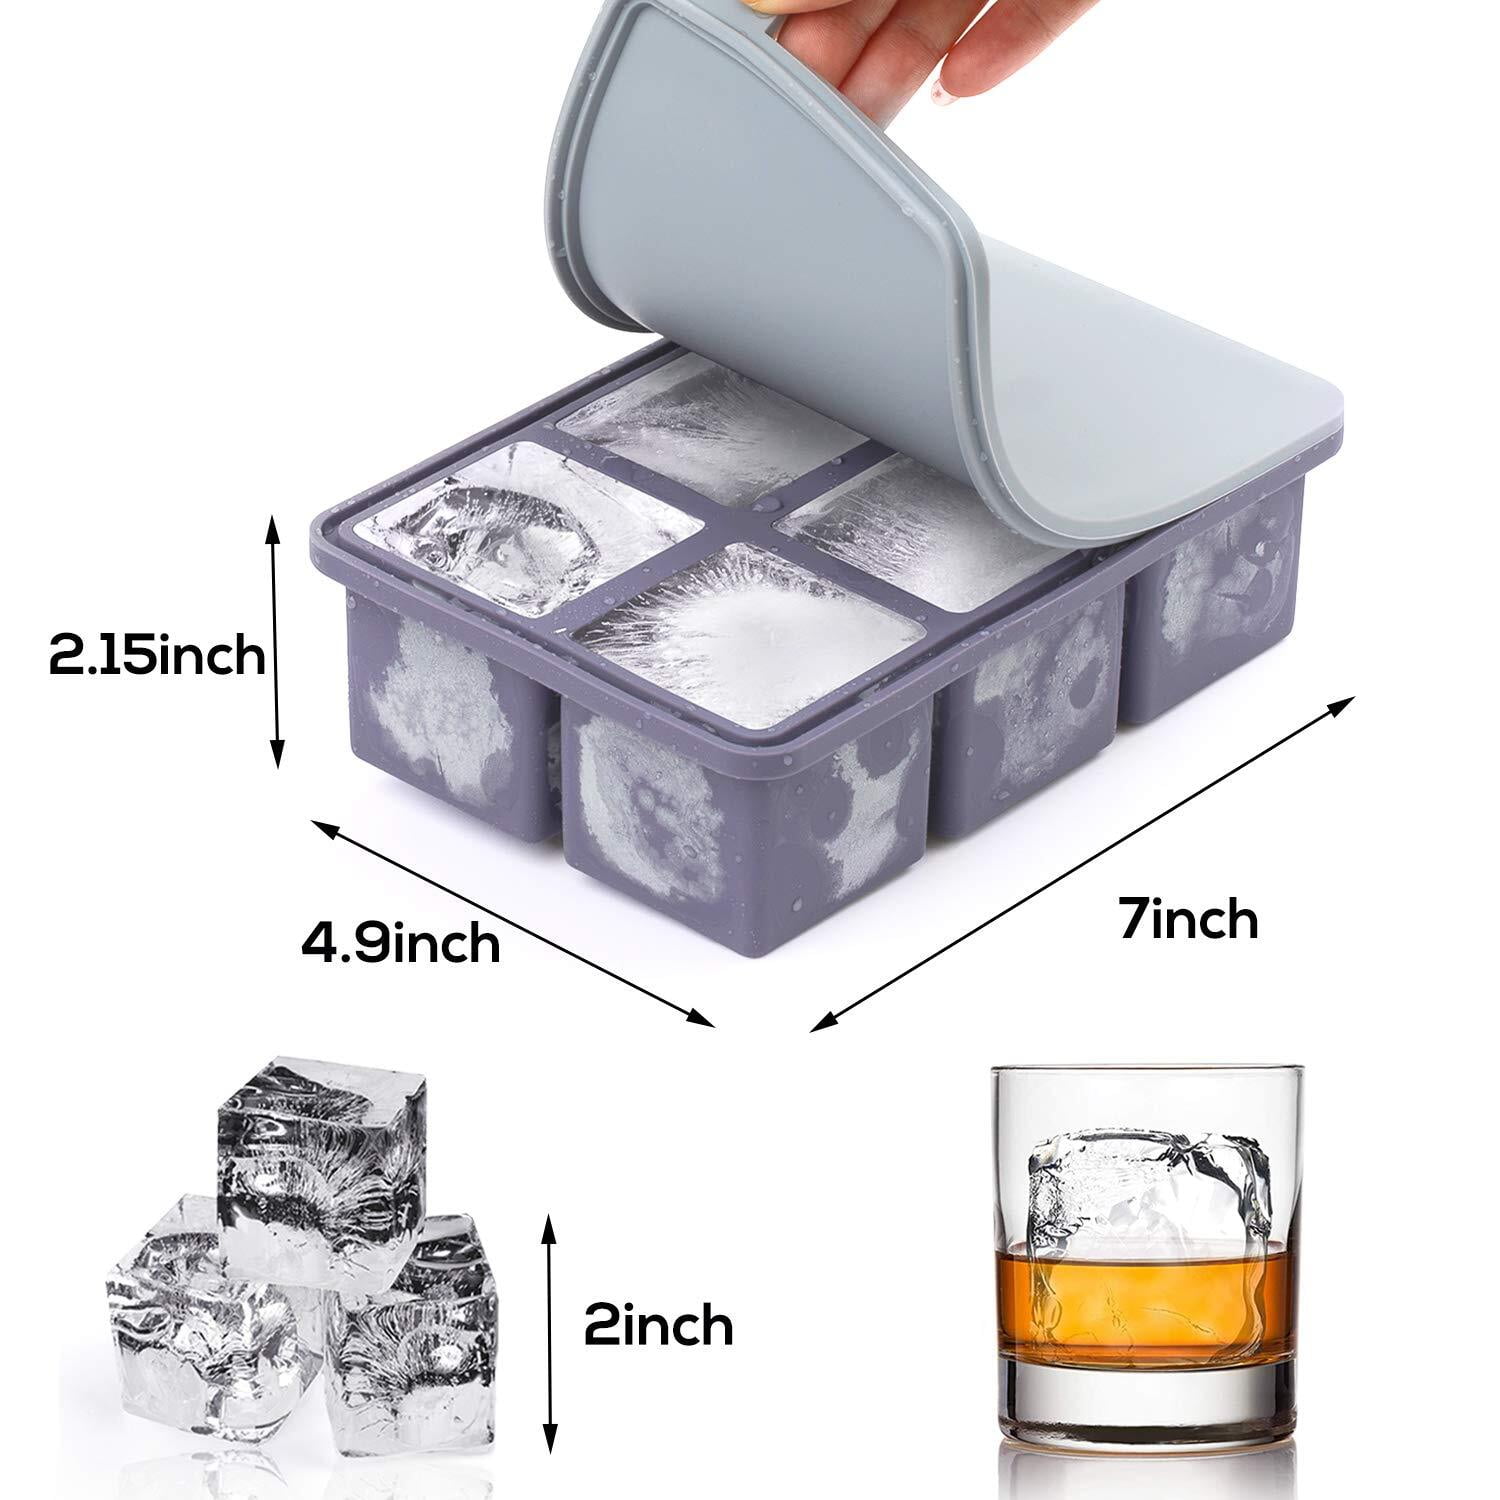 Large Square Silicone Ice Cube Trays for freezer with Lids, 2 Pack, 2 inch  Ice Cube Molds, Whiskey,Cocktail,Baby Food Storage,Sauce Soups Freezing